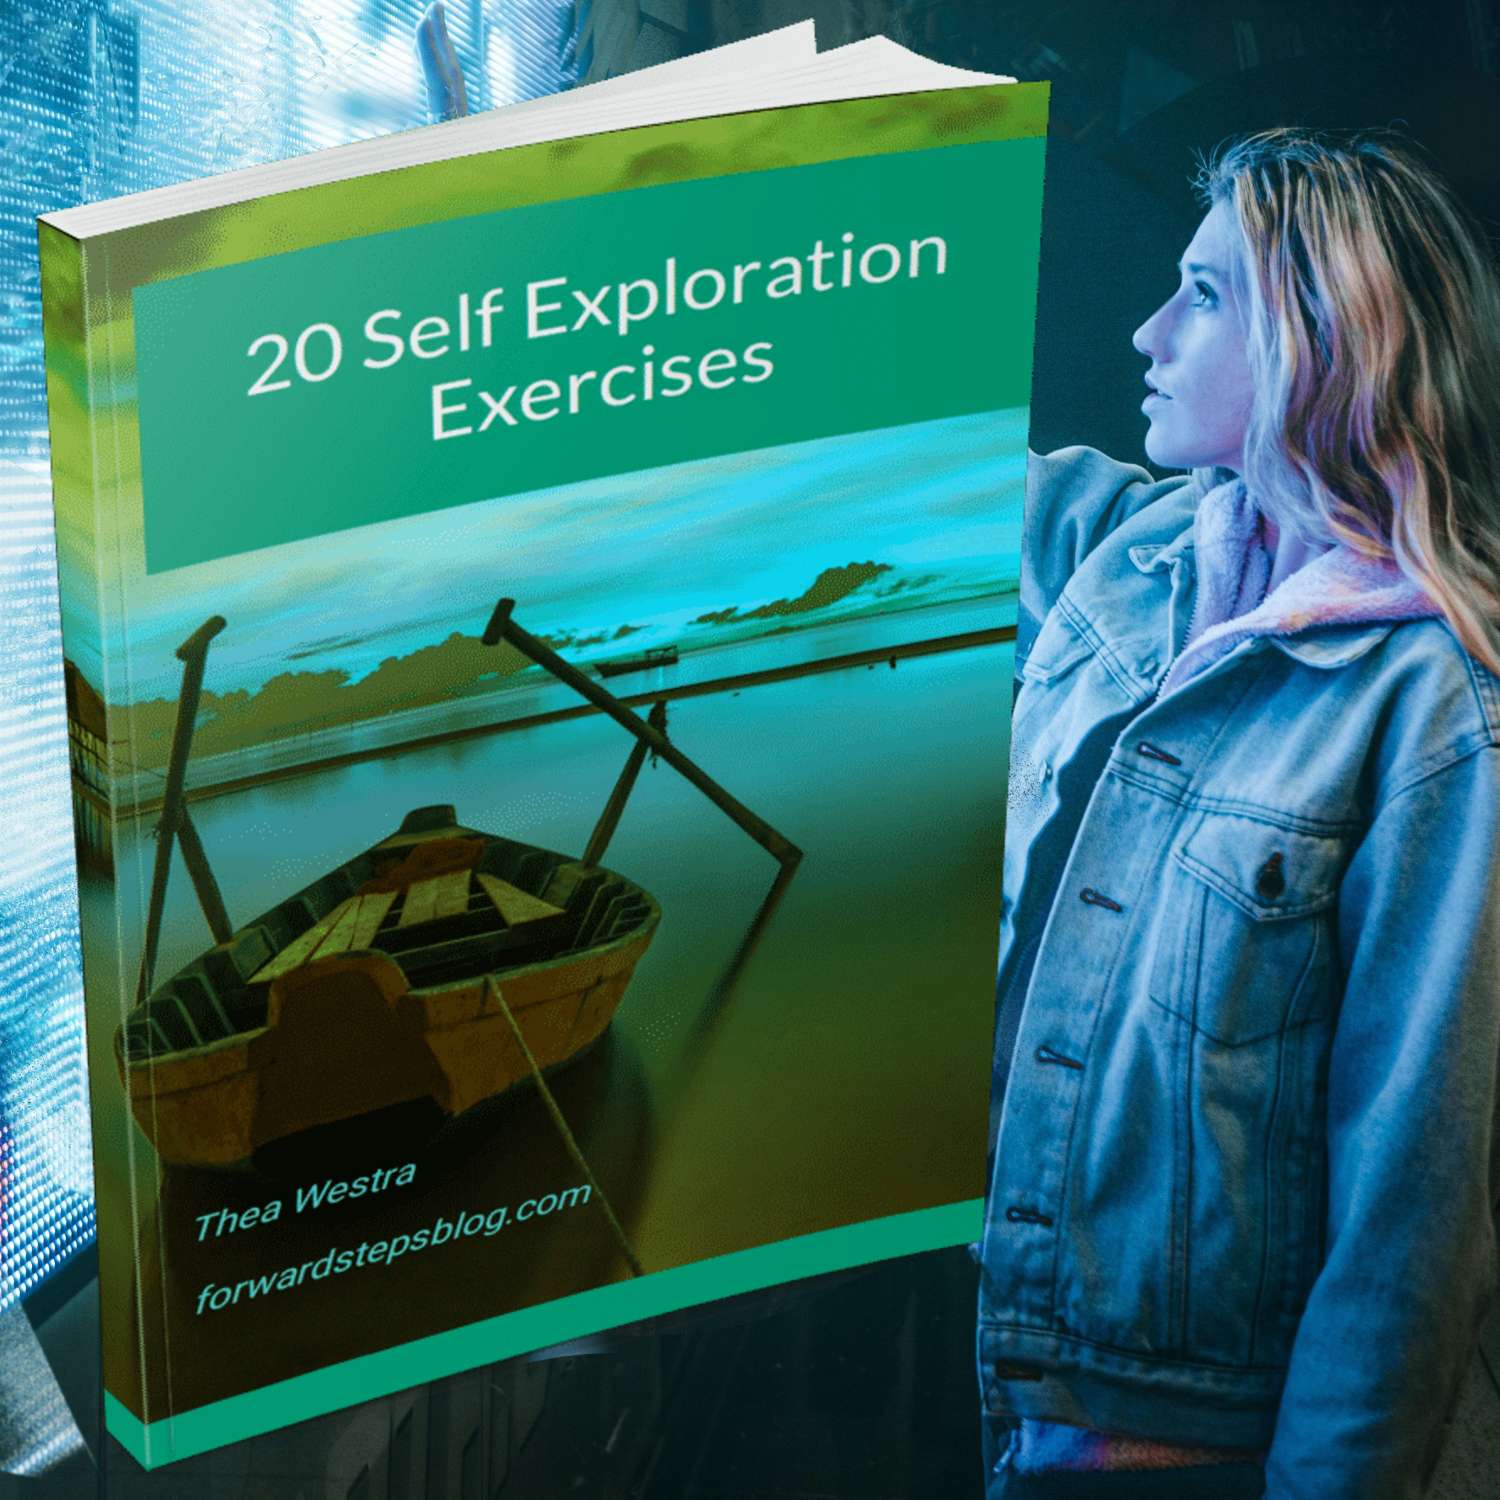 20 Self Reflection Exercises free ebook <!--- NOTE: original size 1500px X 1500px. Change height & width to scale using https://selfimprovementgift.com/forwardsteps/image-resize/ -->